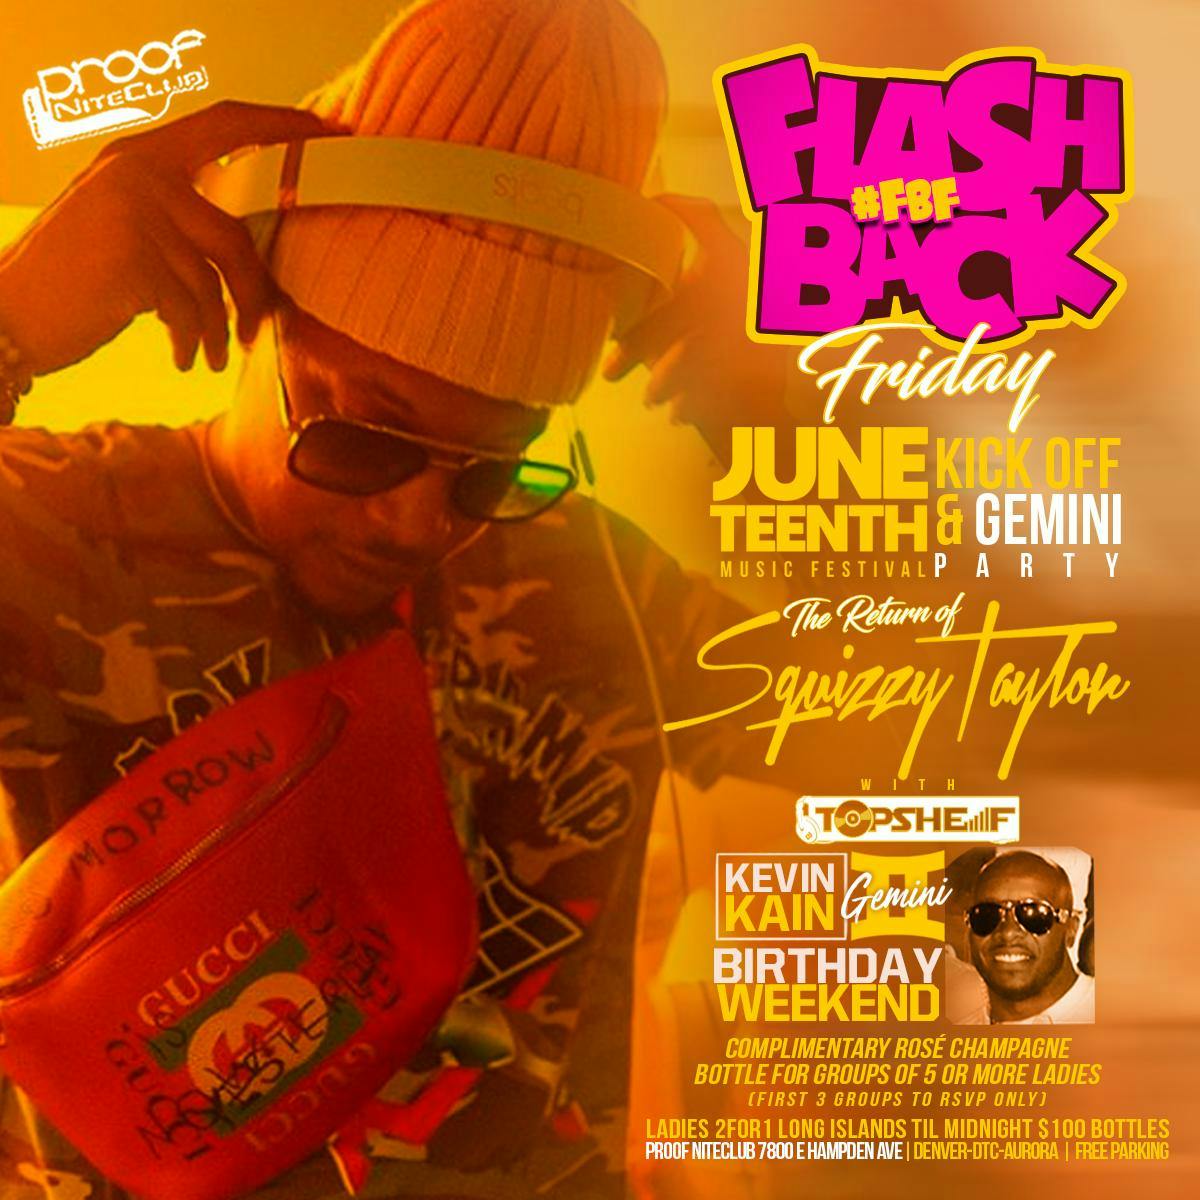  6/14 Juneteenth & Gemini Party DJ SQUIZZY TAYLOR & KEVIN KAIN BDAY @PROOF